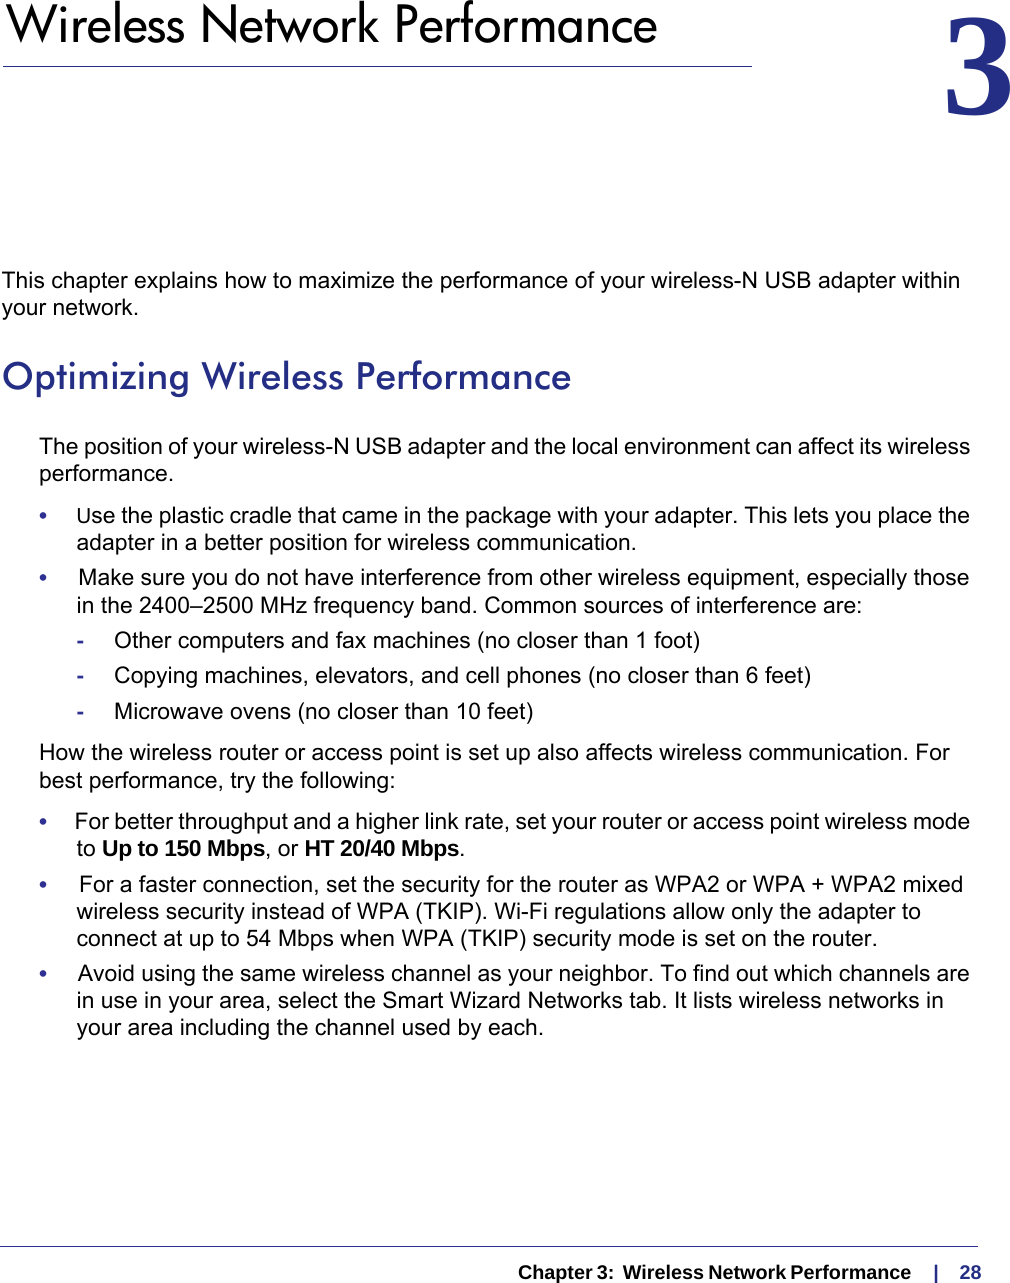   Chapter 3:  Wireless Network Performance     |    283.   Wireless Network Performance 3This chapter explains how to maximize the performance of your wireless-N USB adapter within your network. Optimizing Wireless PerformanceThe position of your wireless-N USB adapter and the local environment can affect its wireless performance.•     Use the plastic cradle that came in the package with your adapter. This lets you place the adapter in a better position for wireless communication. •     Make sure you do not have interference from other wireless equipment, especially those in the 2400–2500 MHz frequency band. Common sources of interference are:-Other computers and fax machines (no closer than 1 foot)-Copying machines, elevators, and cell phones (no closer than 6 feet)-Microwave ovens (no closer than 10 feet)How the wireless router or access point is set up also affects wireless communication. For best performance, try the following:•     For better throughput and a higher link rate, set your router or access point wireless mode to Up to 150 Mbps, or HT 20/40 Mbps. •     For a faster connection, set the security for the router as WPA2 or WPA + WPA2 mixed wireless security instead of WPA (TKIP). Wi-Fi regulations allow only the adapter to connect at up to 54 Mbps when WPA (TKIP) security mode is set on the router.•     Avoid using the same wireless channel as your neighbor. To find out which channels are in use in your area, select the Smart Wizard Networks tab. It lists wireless networks in your area including the channel used by each.